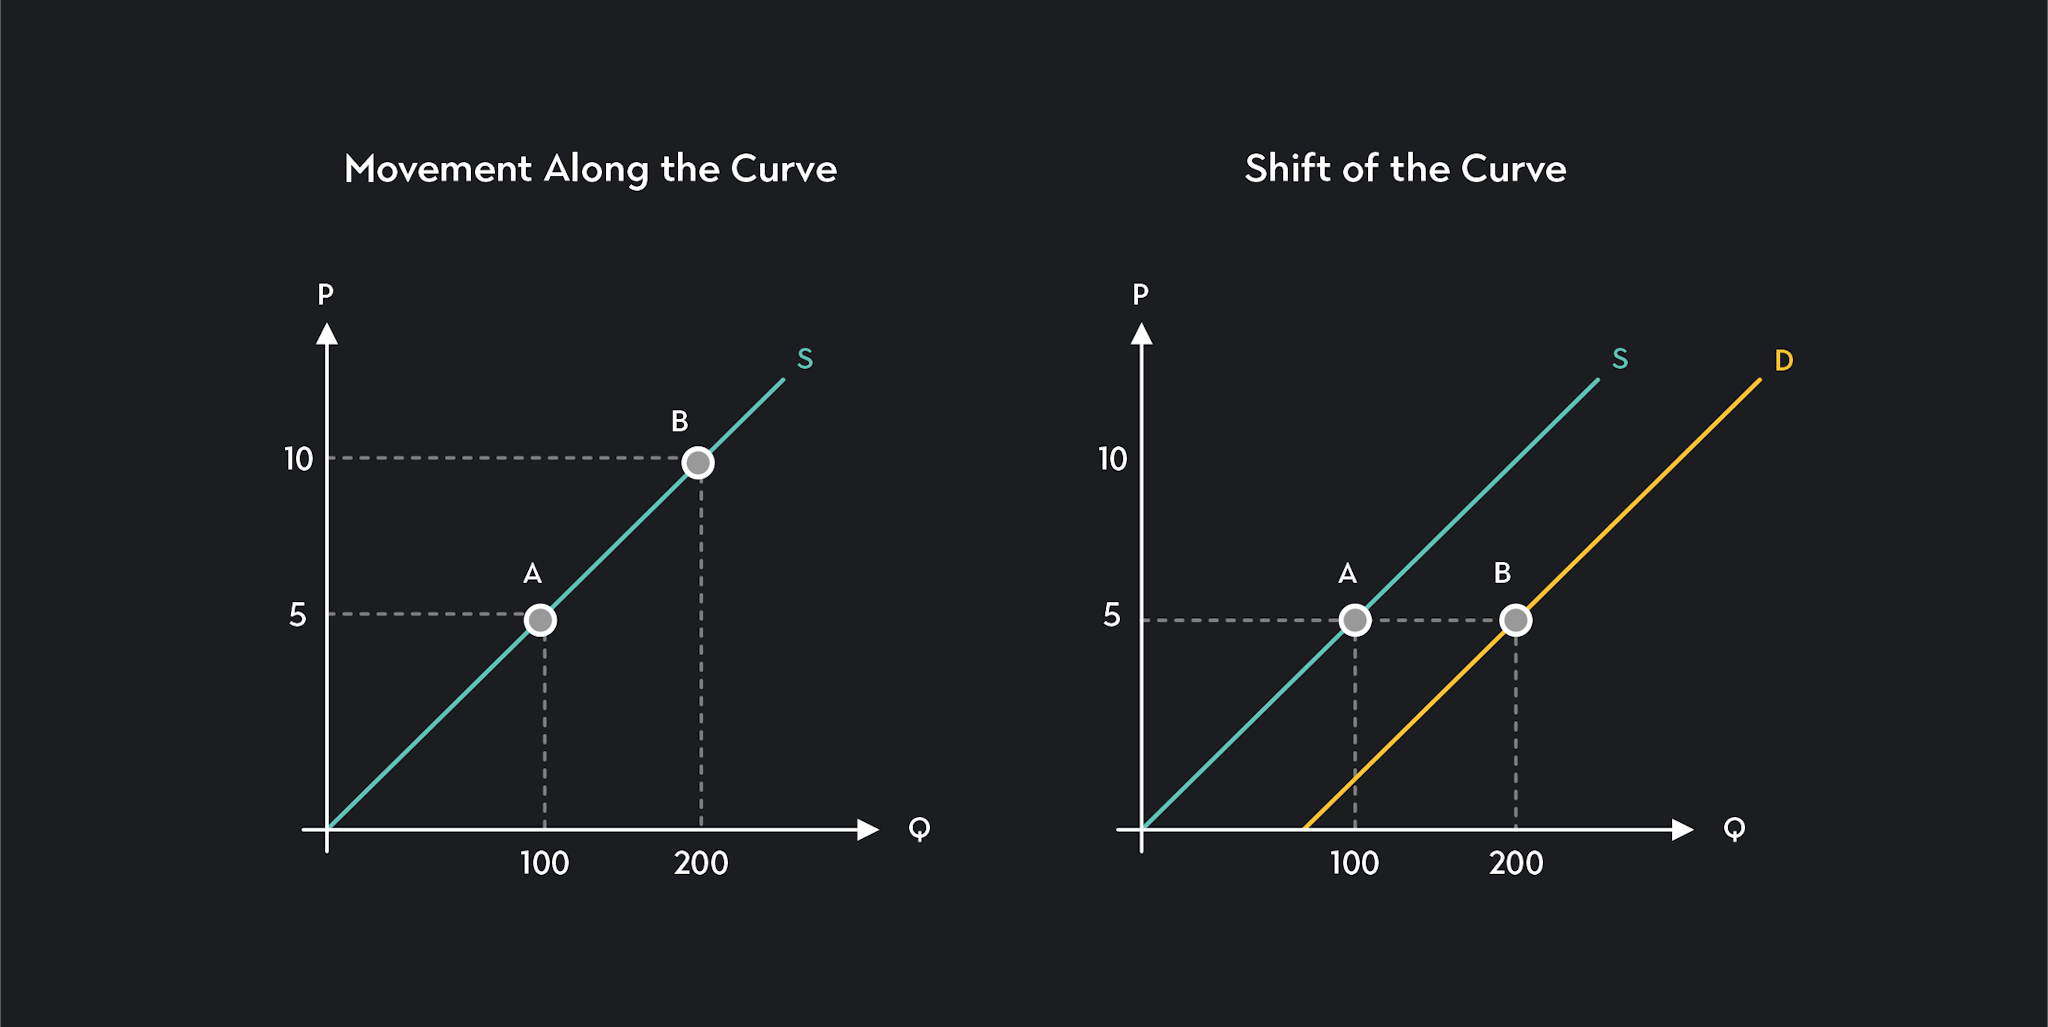 Graph showing movement along the supply curve and a shift of the curve